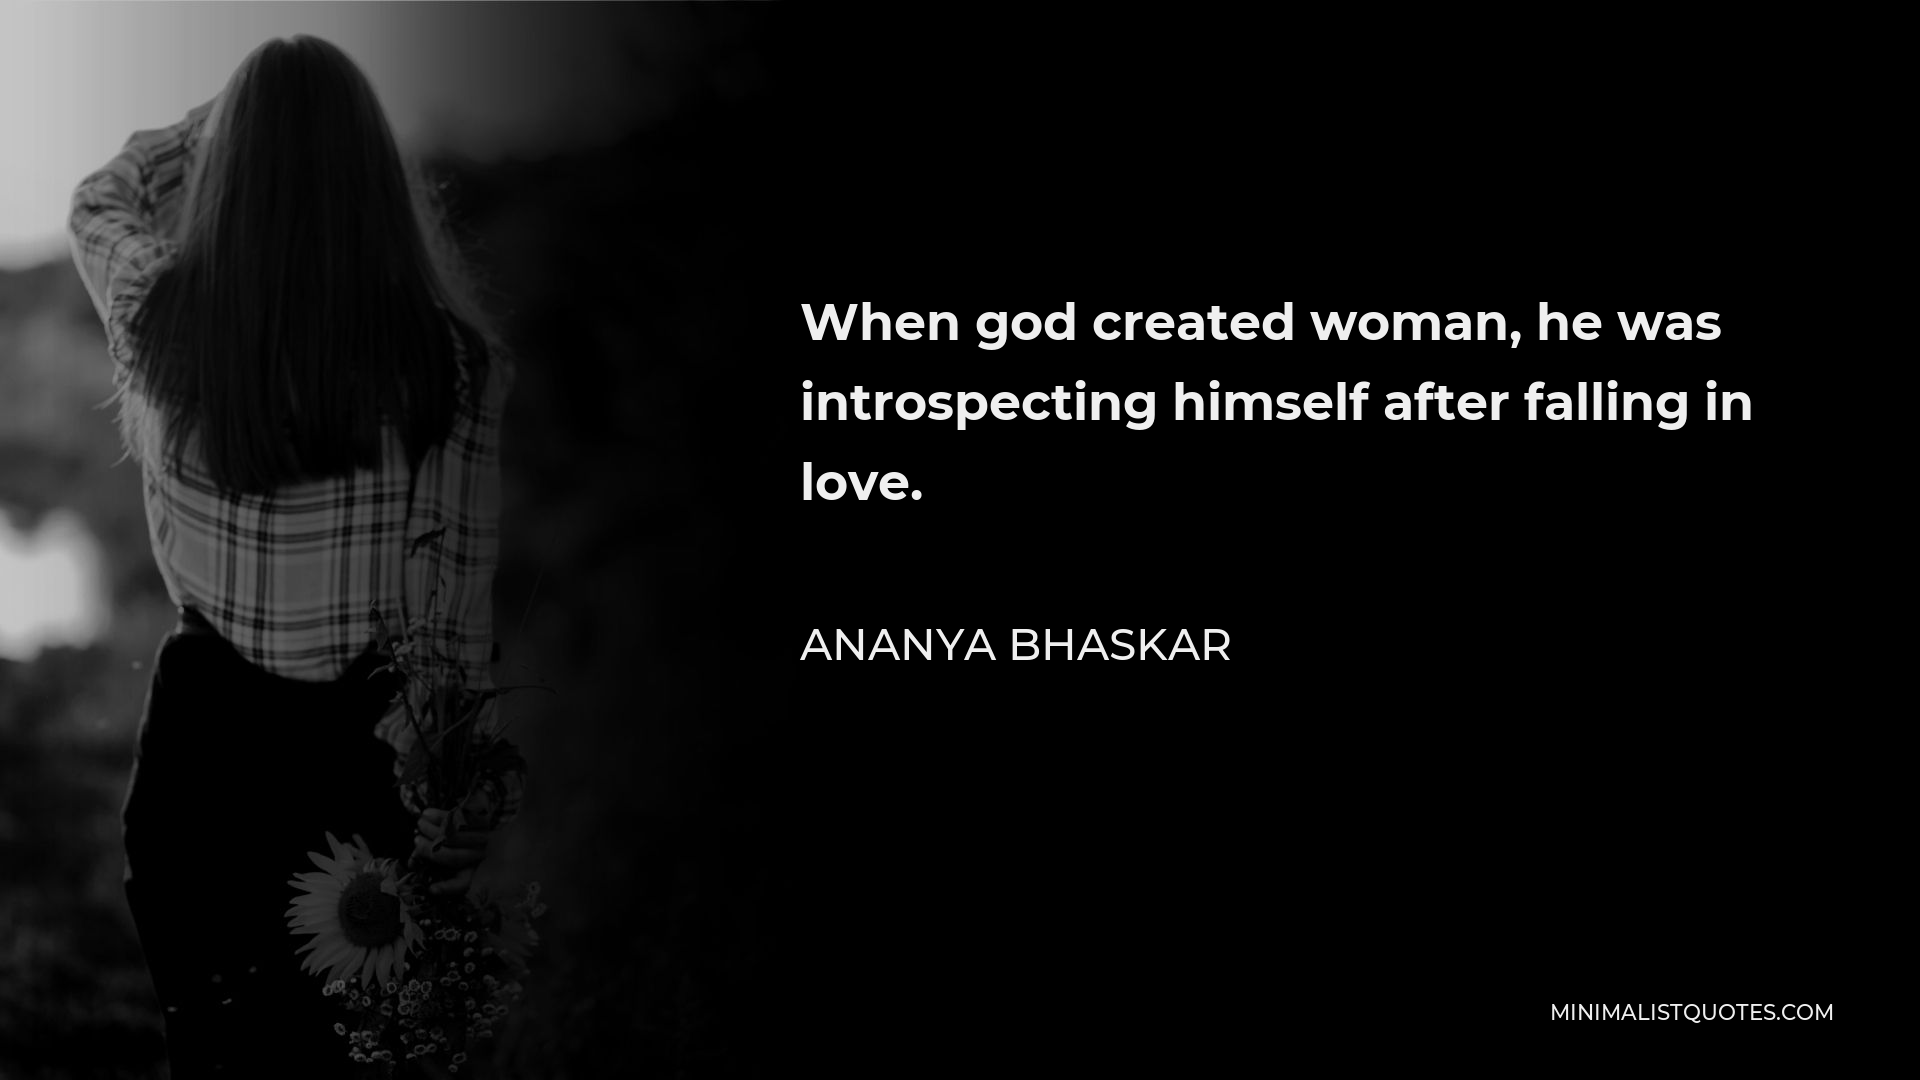 Ananya Bhaskar Quote - When god created woman, he was introspecting himself after falling in love.